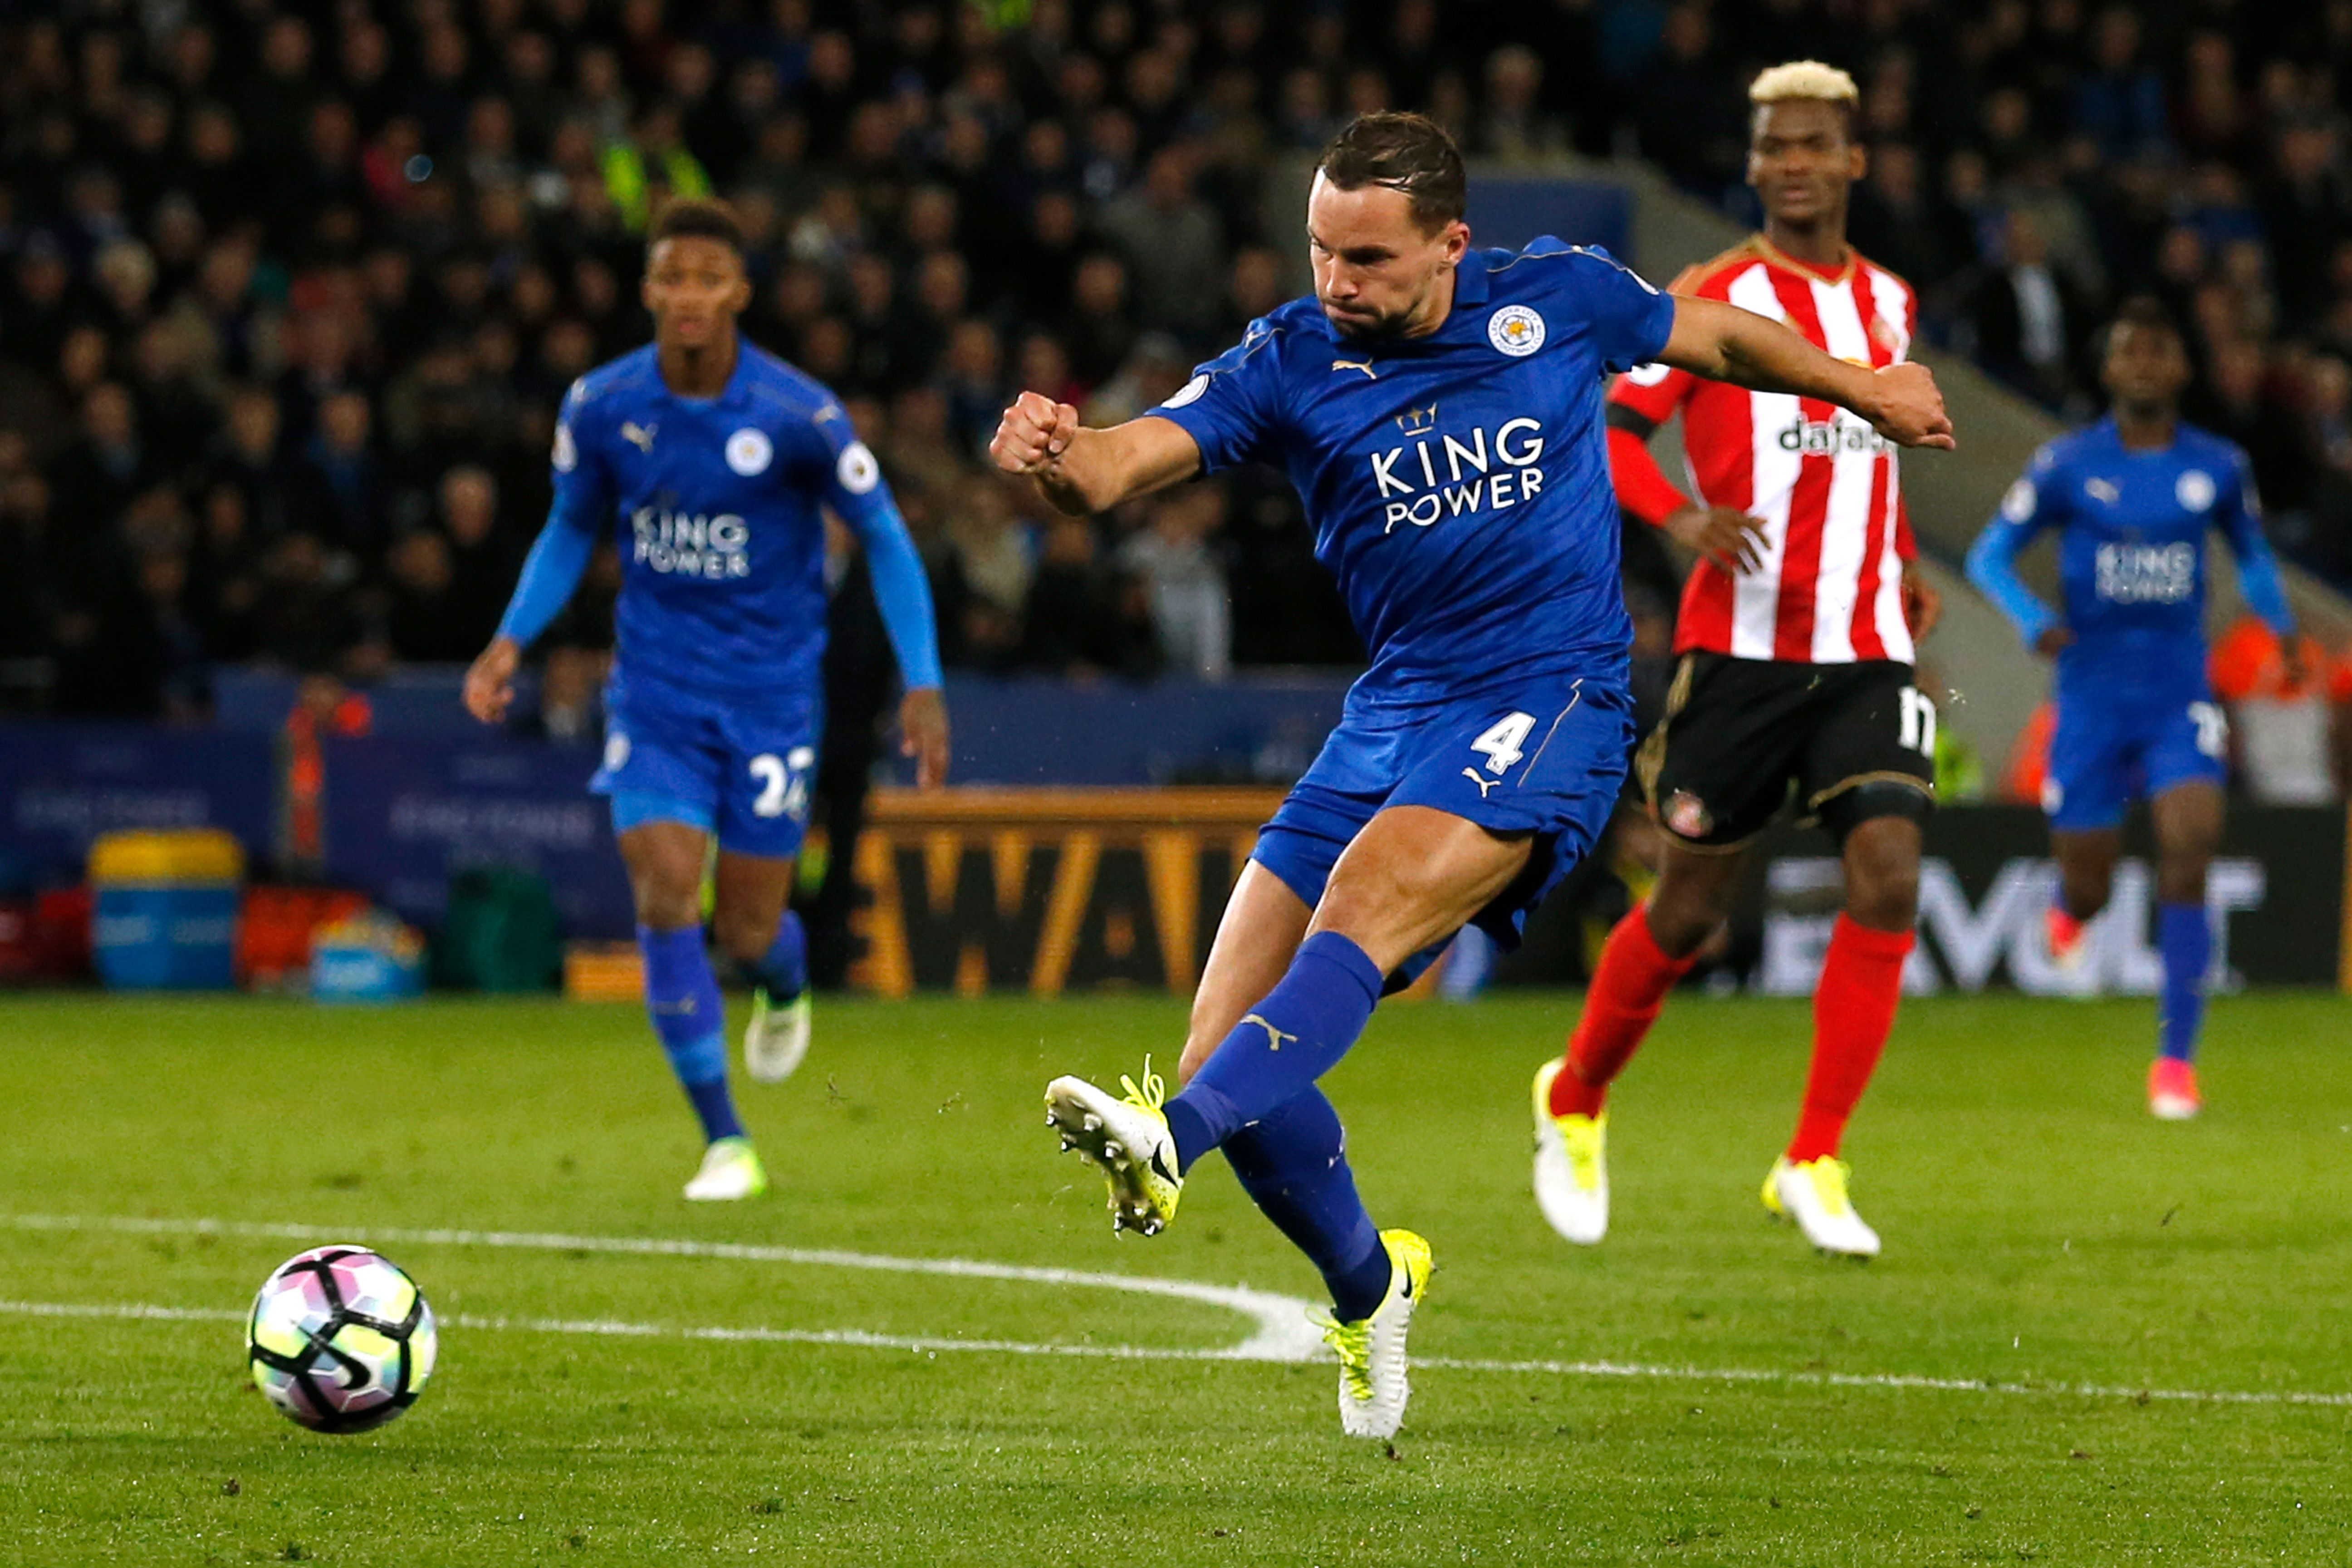 Leicester City's Danny Drinkwater shoots.